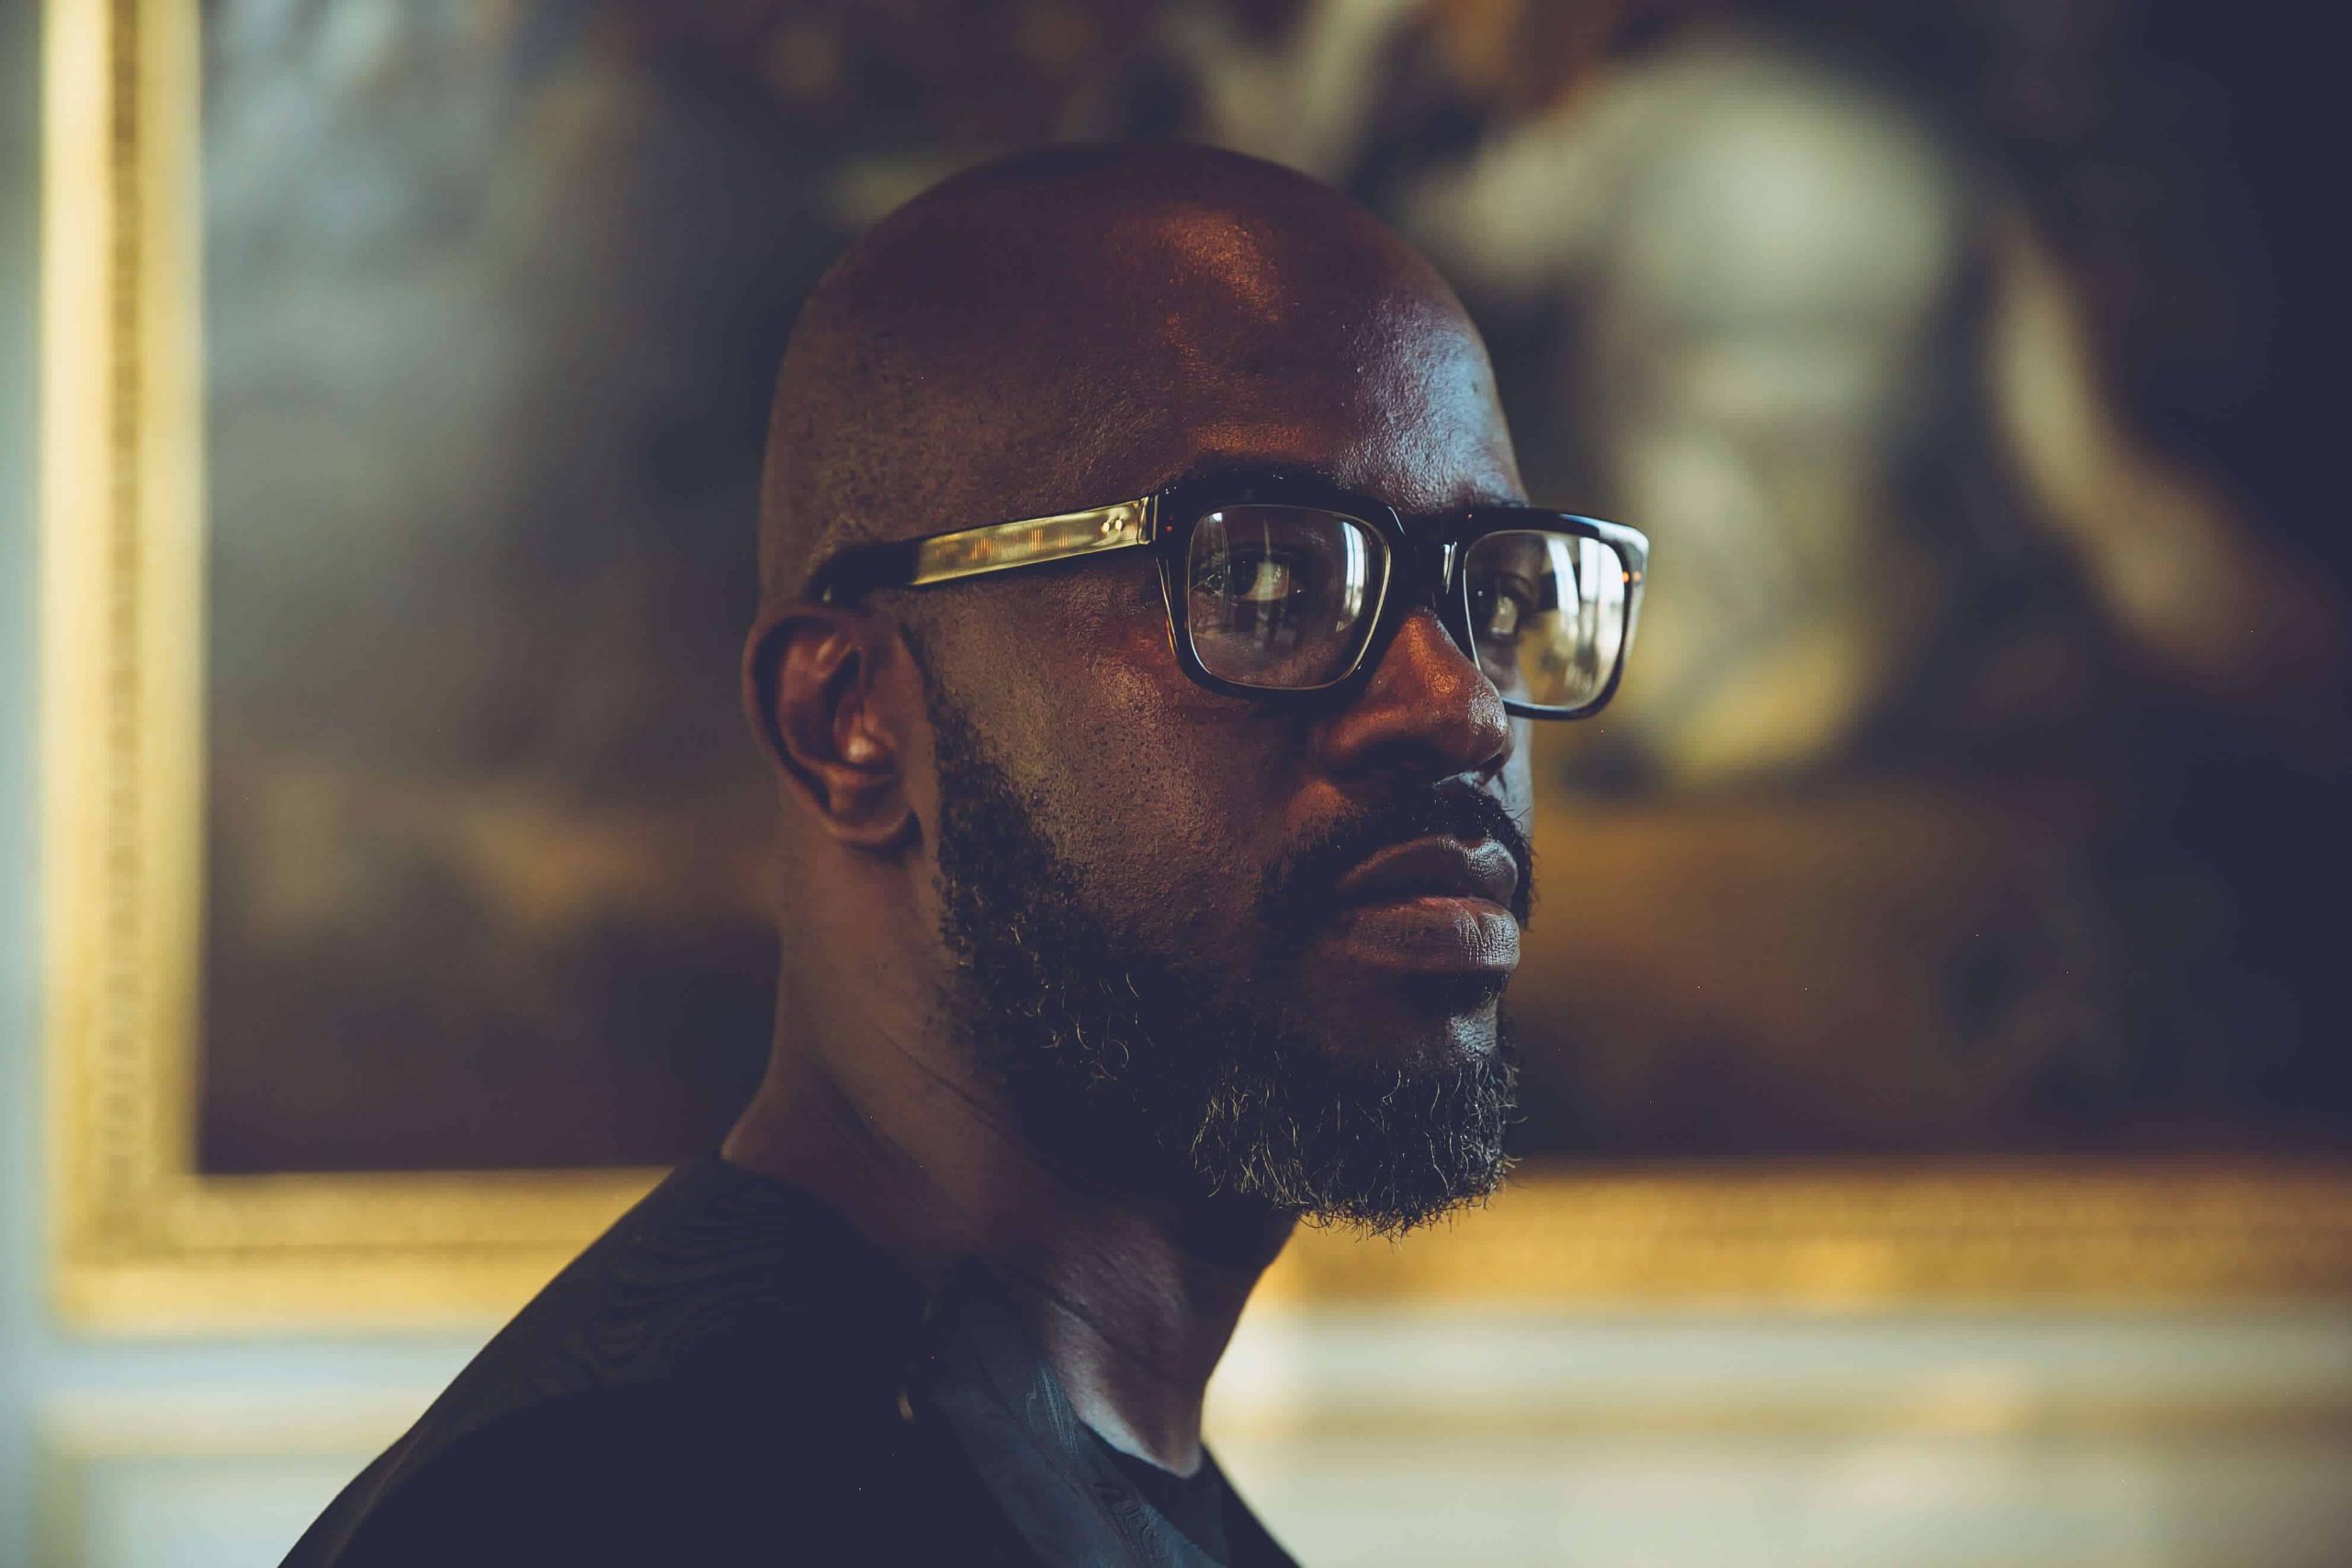 Black Coffee drops new track ‘Ready For You’ & unveils upcoming album: Listen